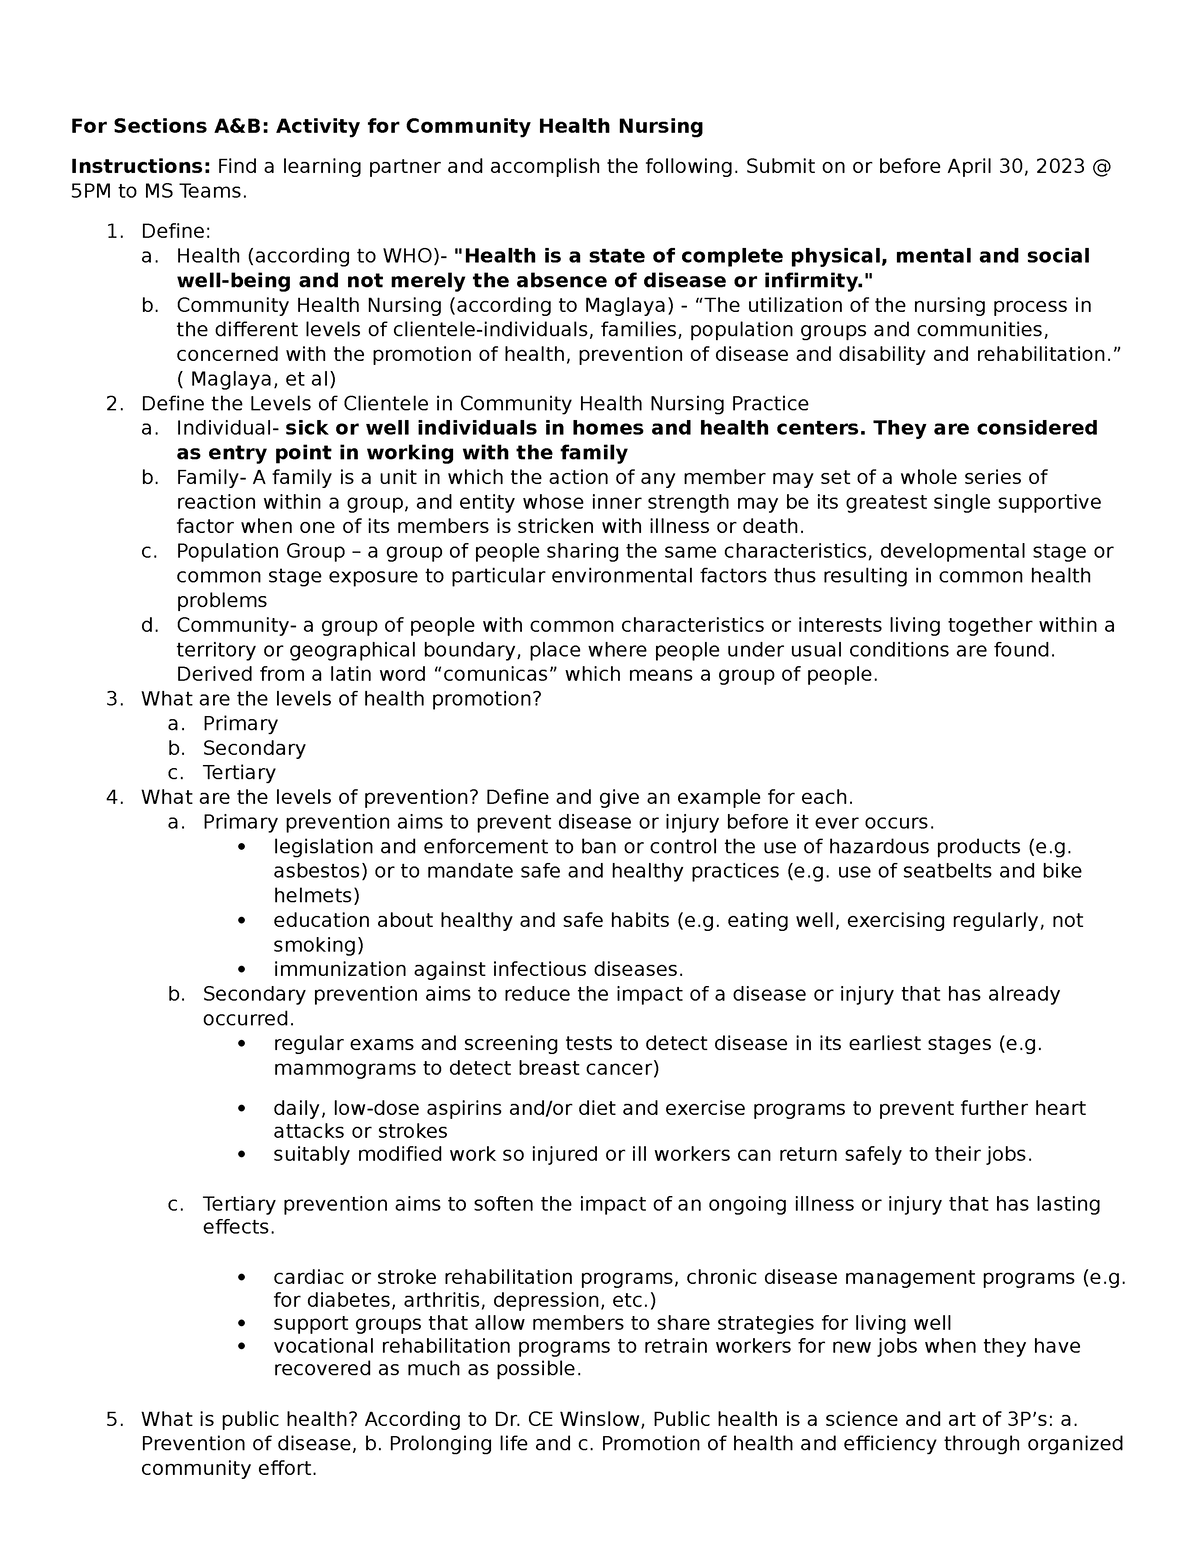 CHN Review-Activity Written - For Sections A&B: Activity for Community ...